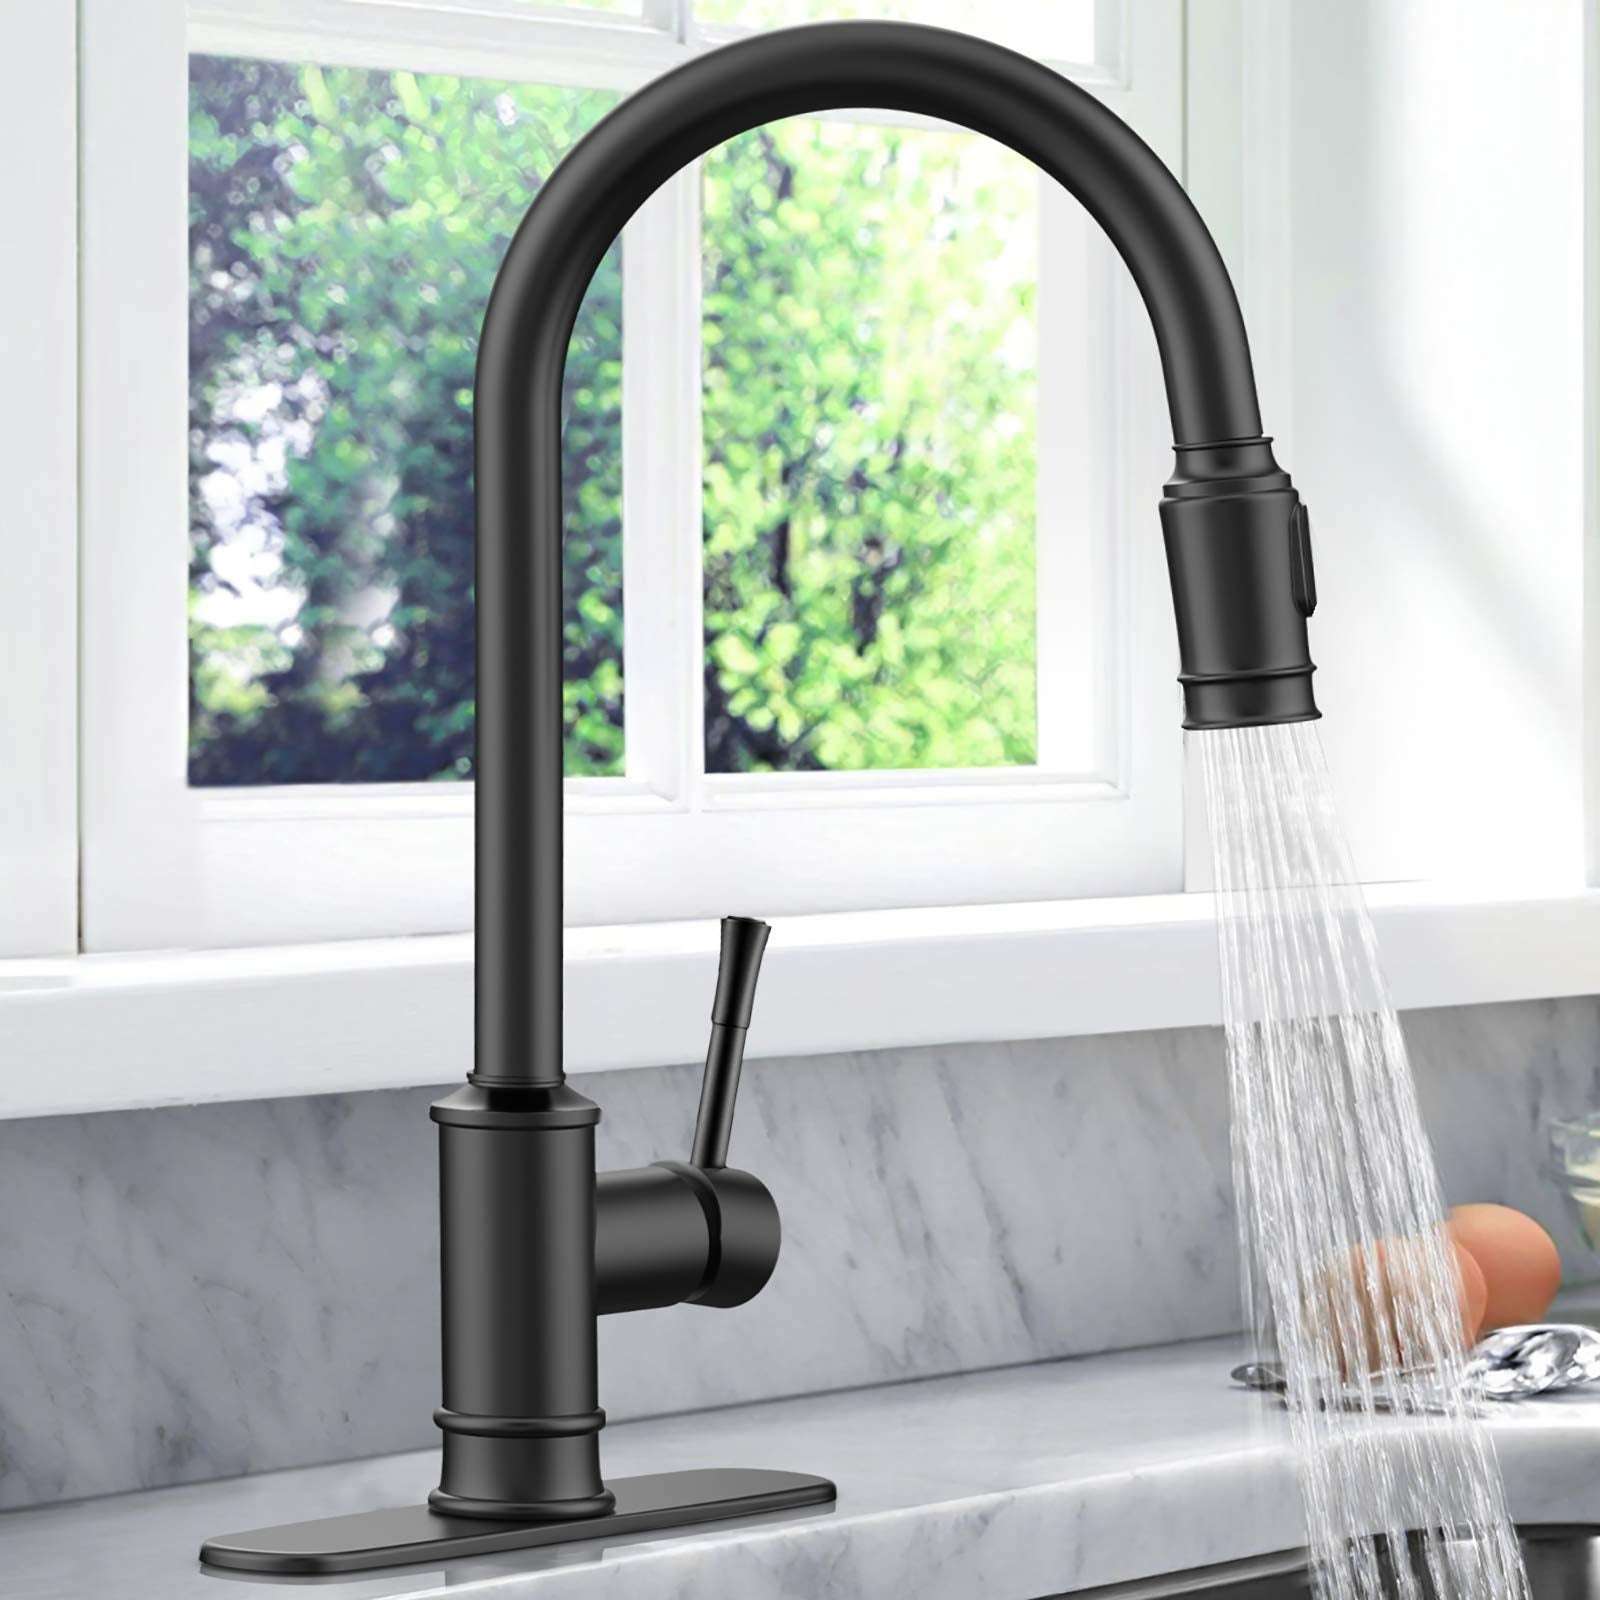 3 Modes 360° Rotation Pull Down Sprayer Kitchen Tap Faucet Head (by quicklify)